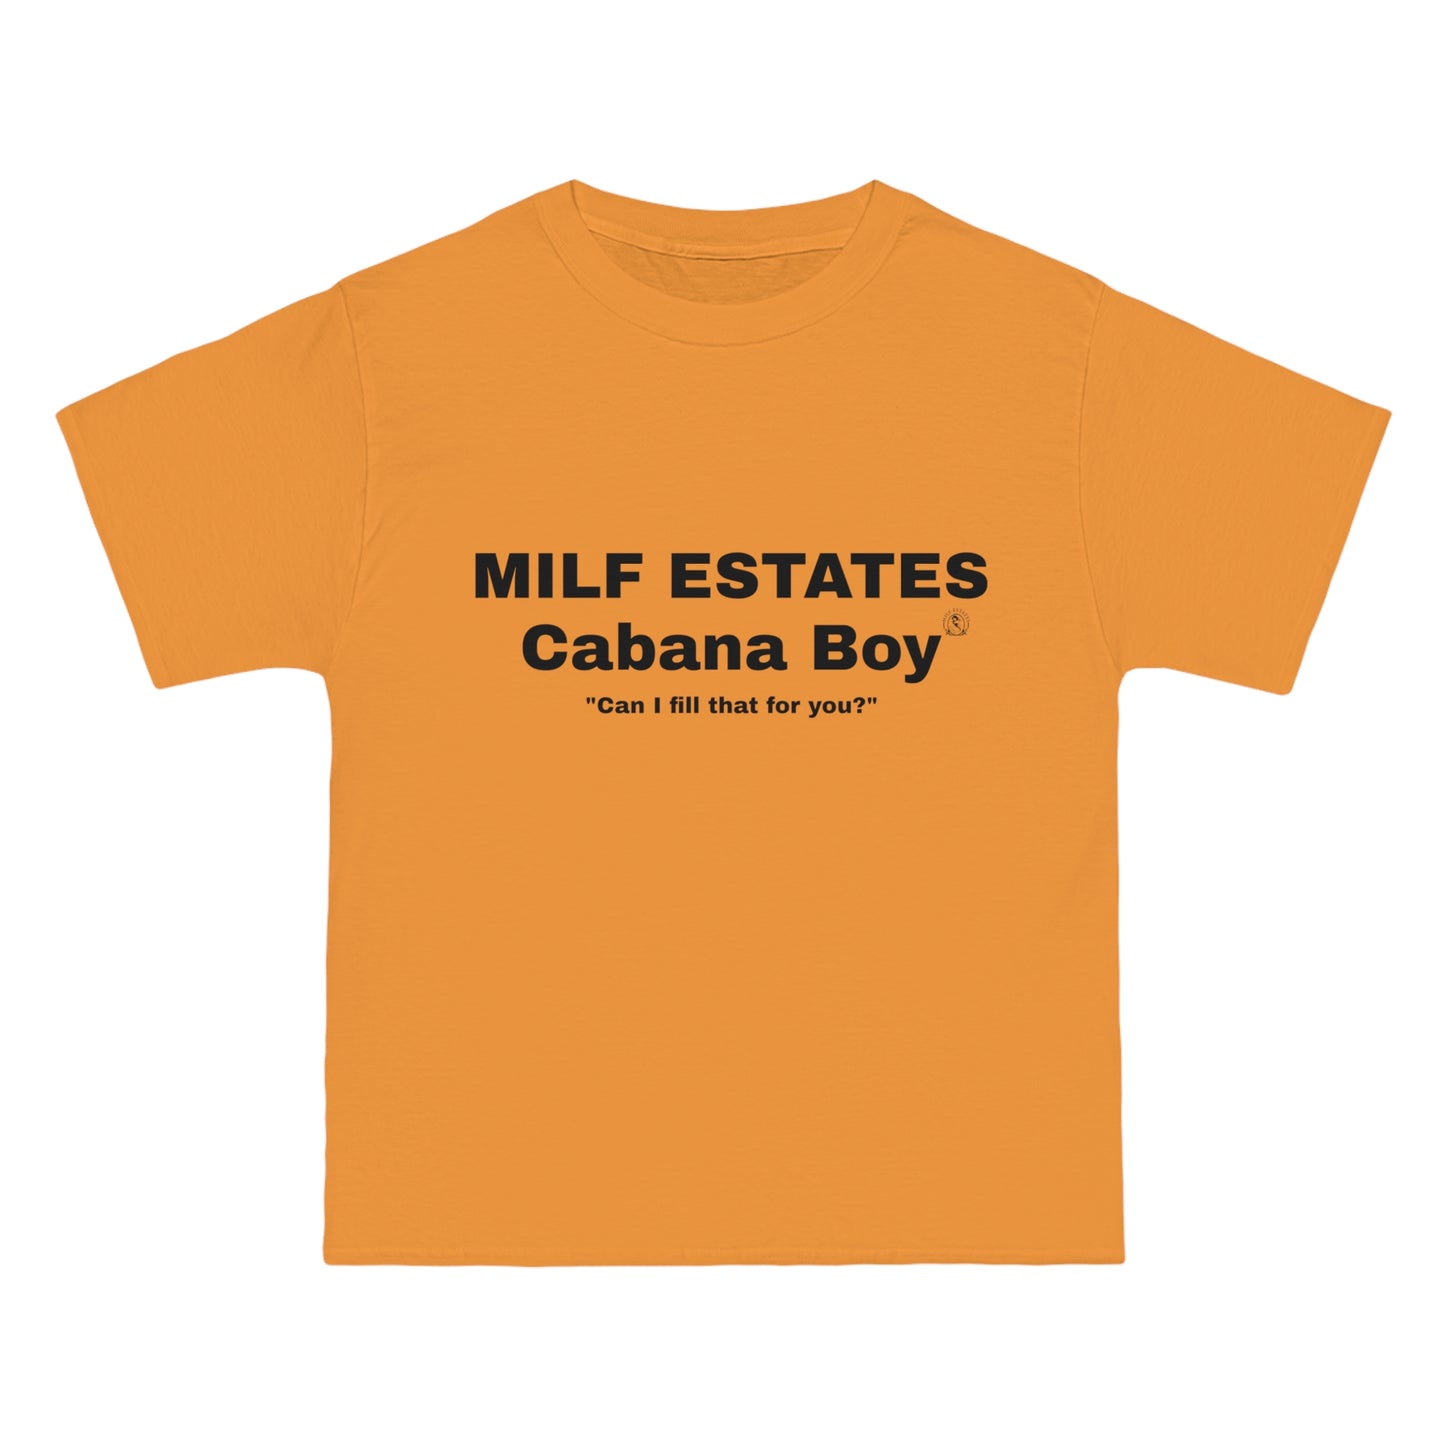 MILF ESTATES Cabana Boy  "Can I fill that for you?"